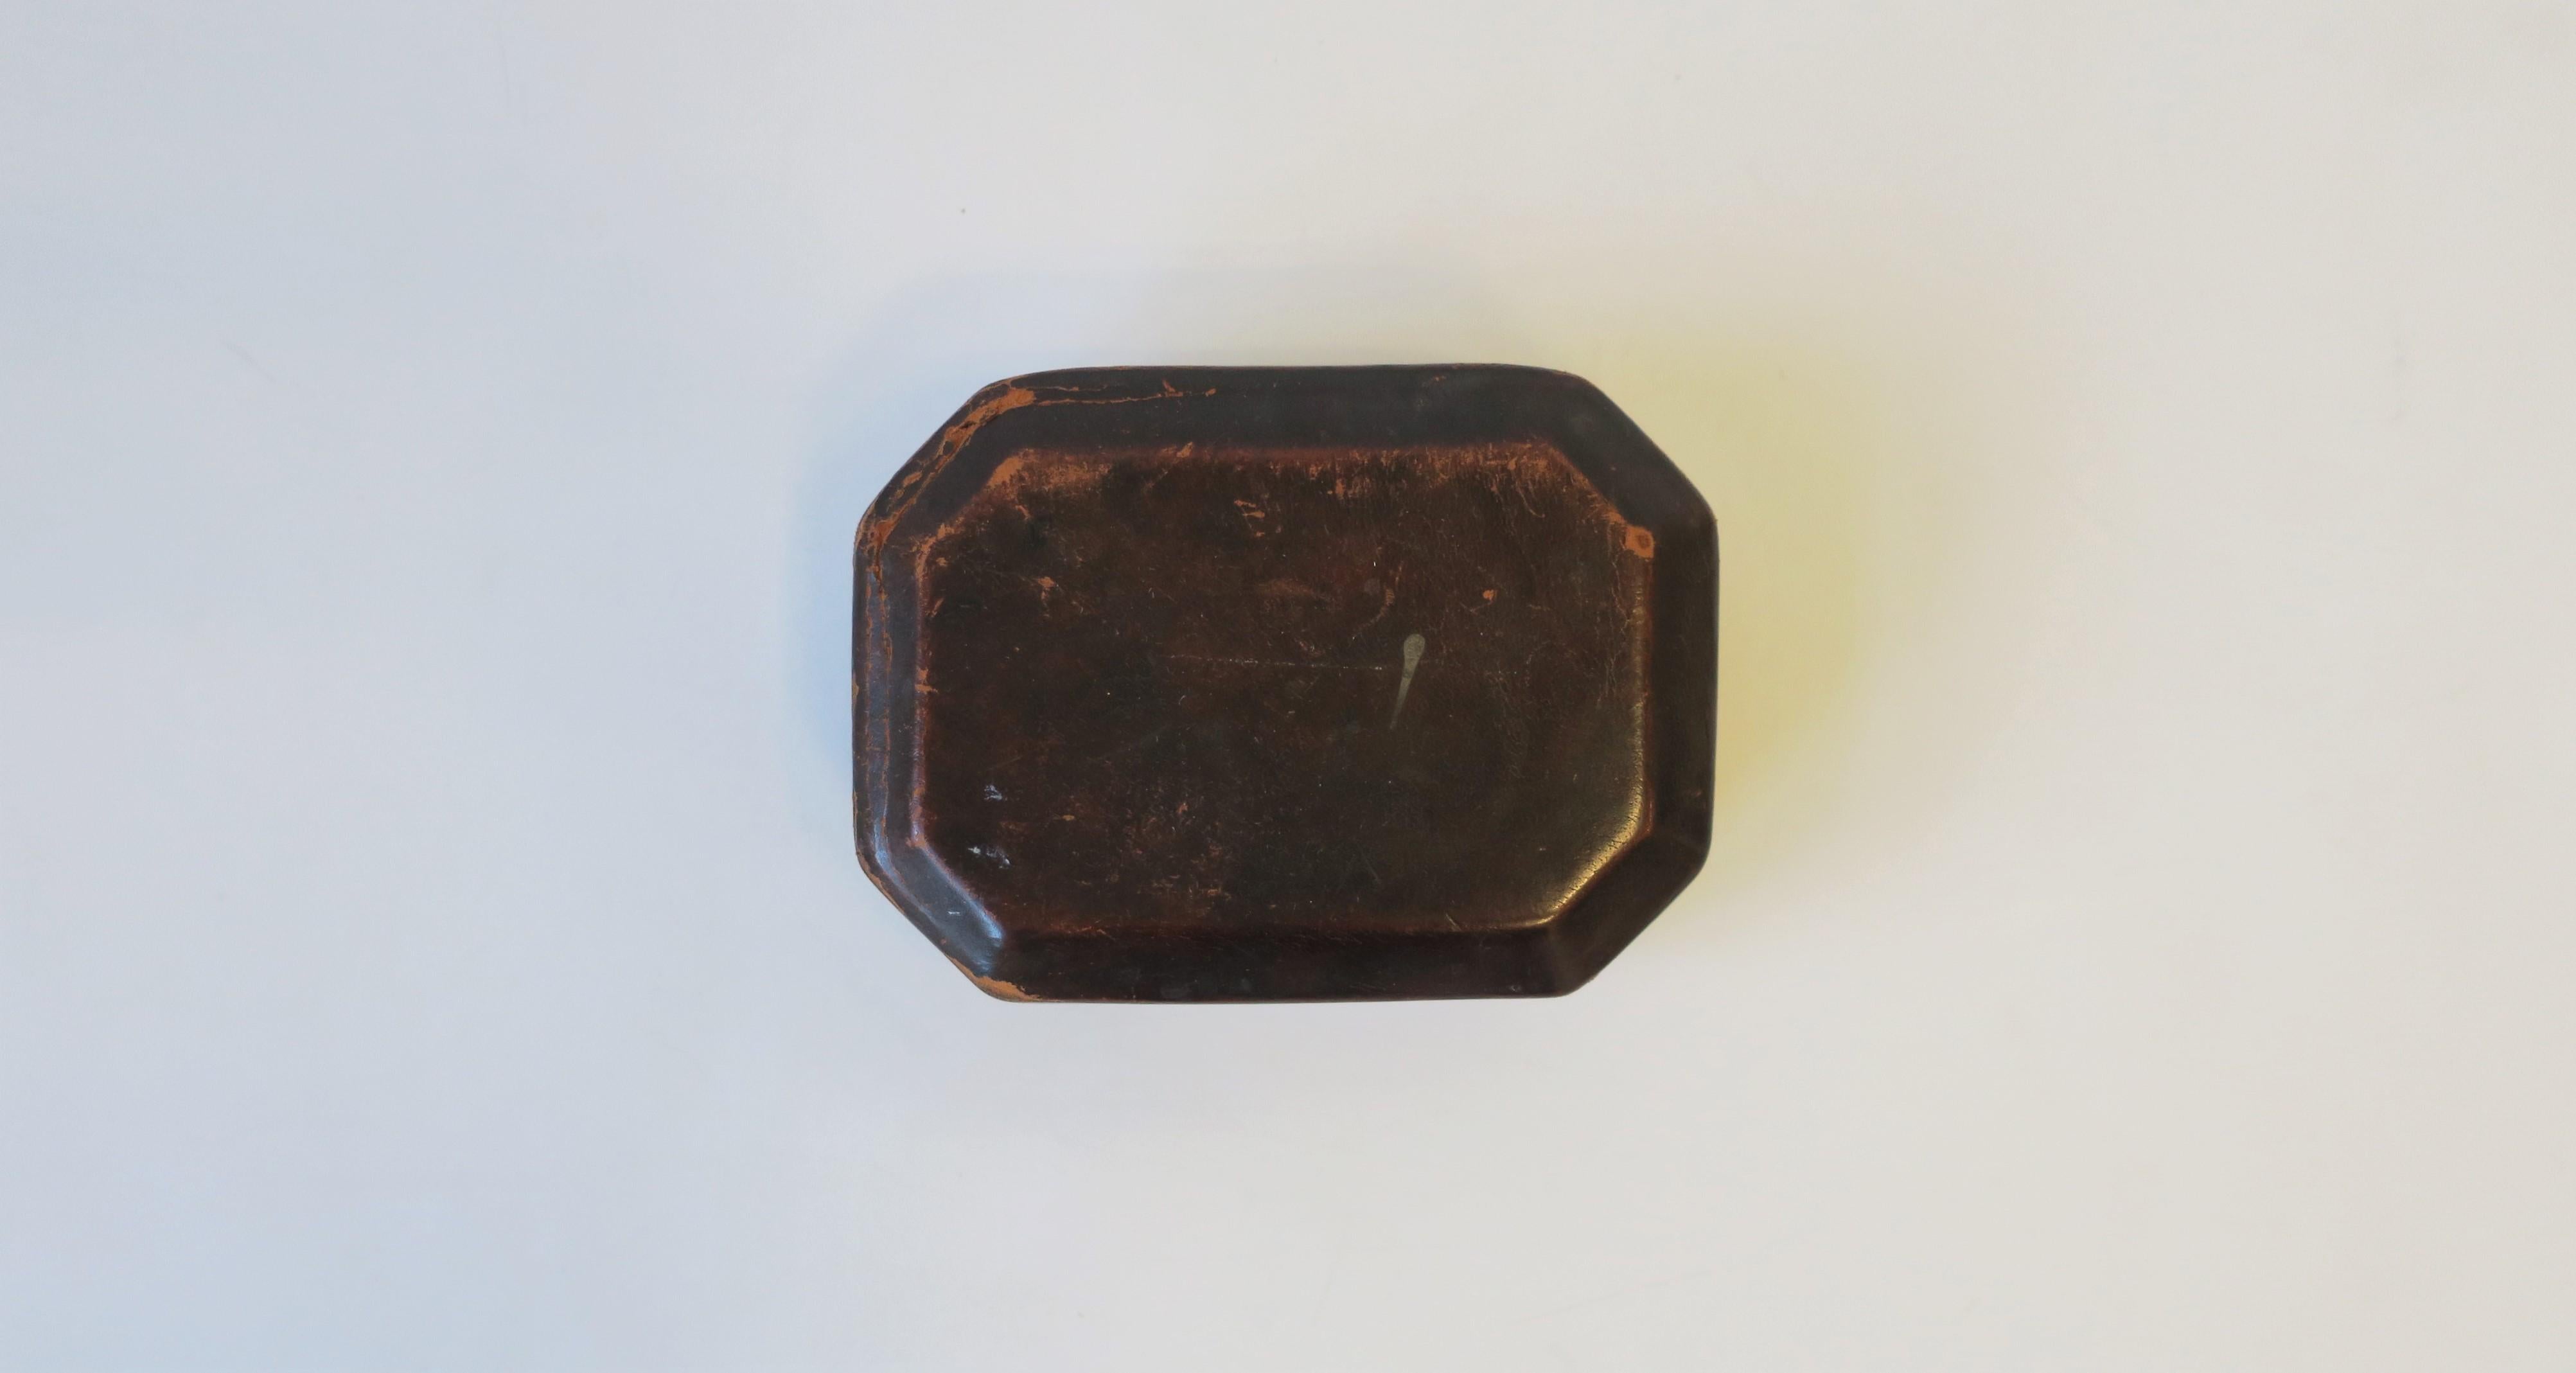 An Italian leather box with an octagonal shape, circa 20th century, 1970s, Italy. A great piece for desk or vanity area for small items or jewelry (as demonstrated.) Dimensions: 3.88